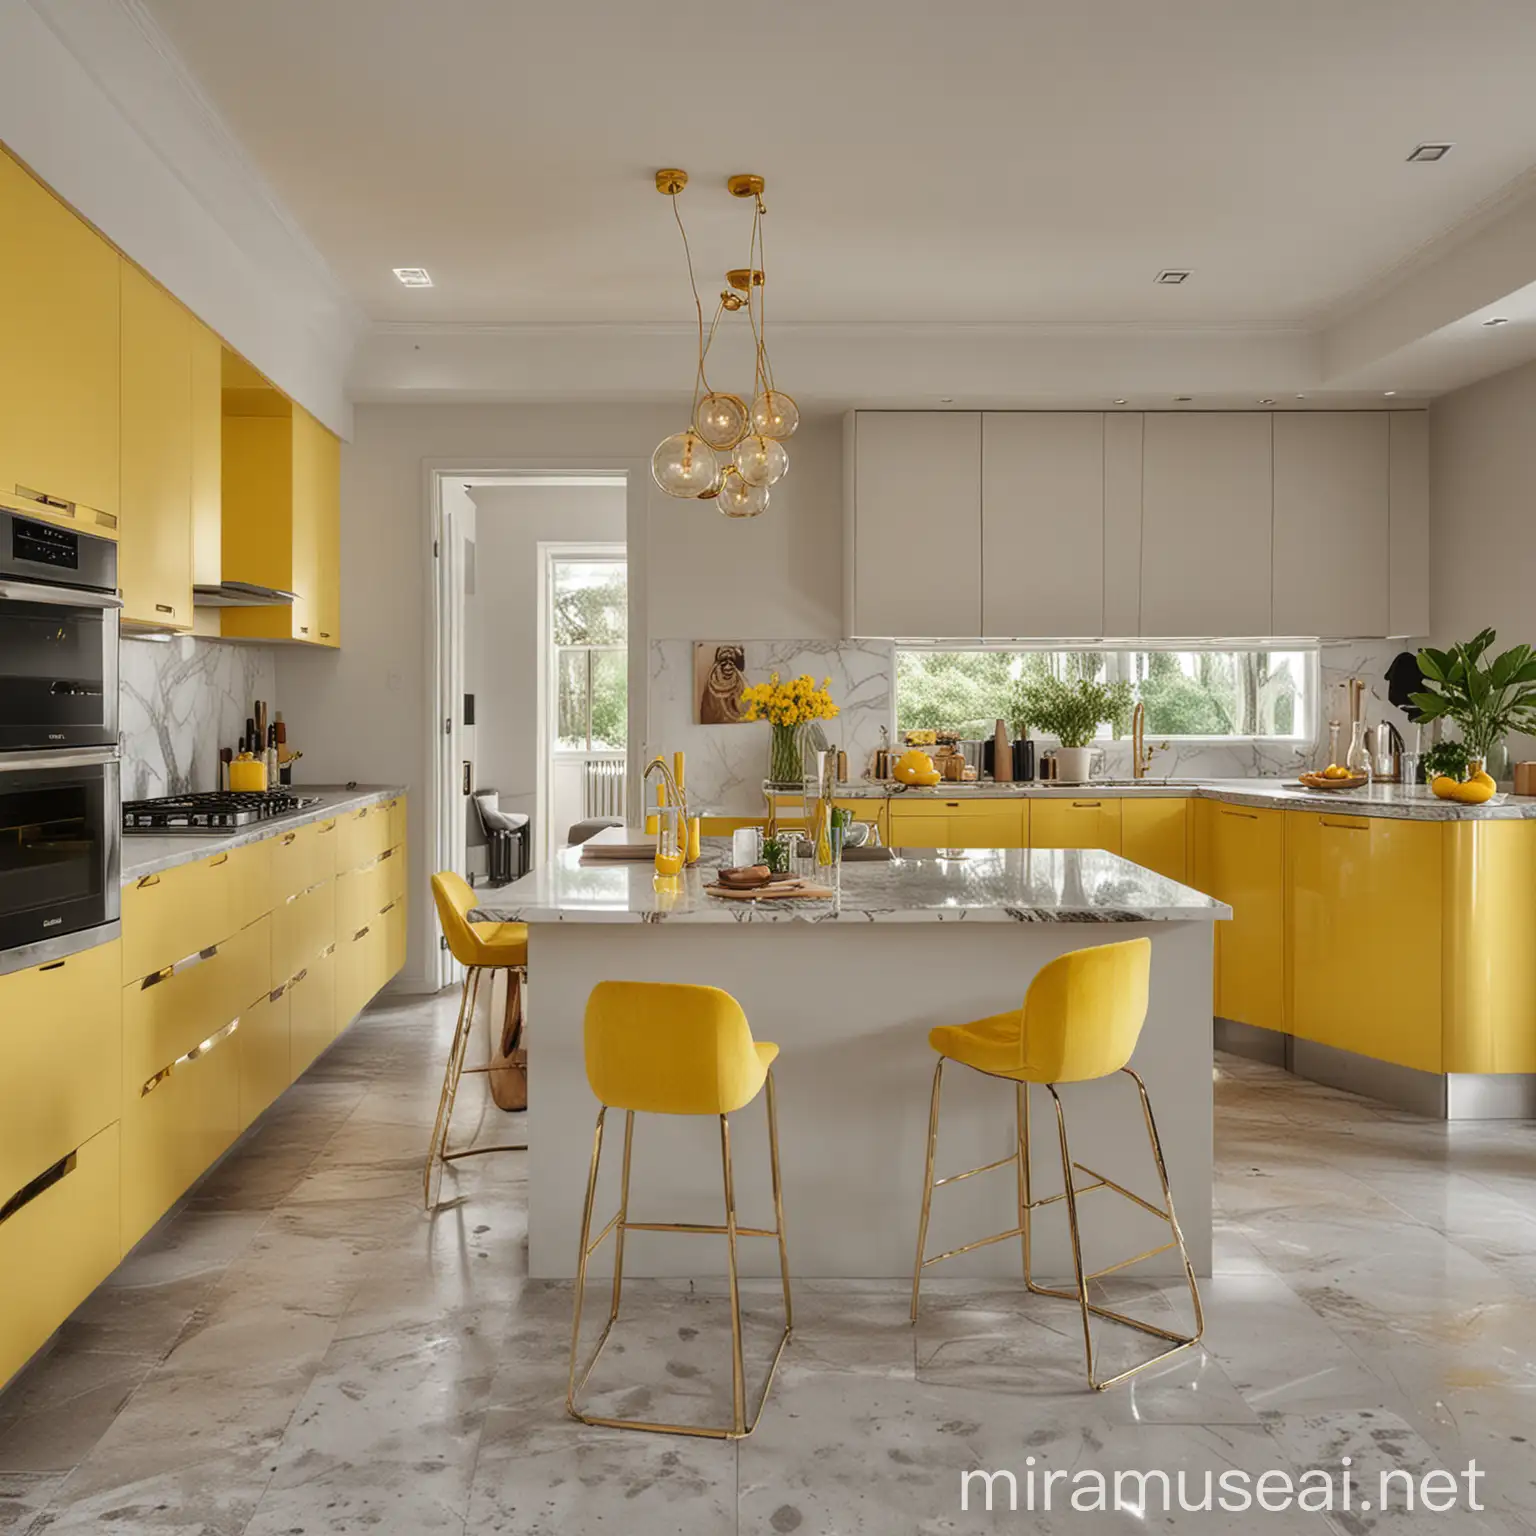 Luxurious Modern Kitchen with Yellow Accents